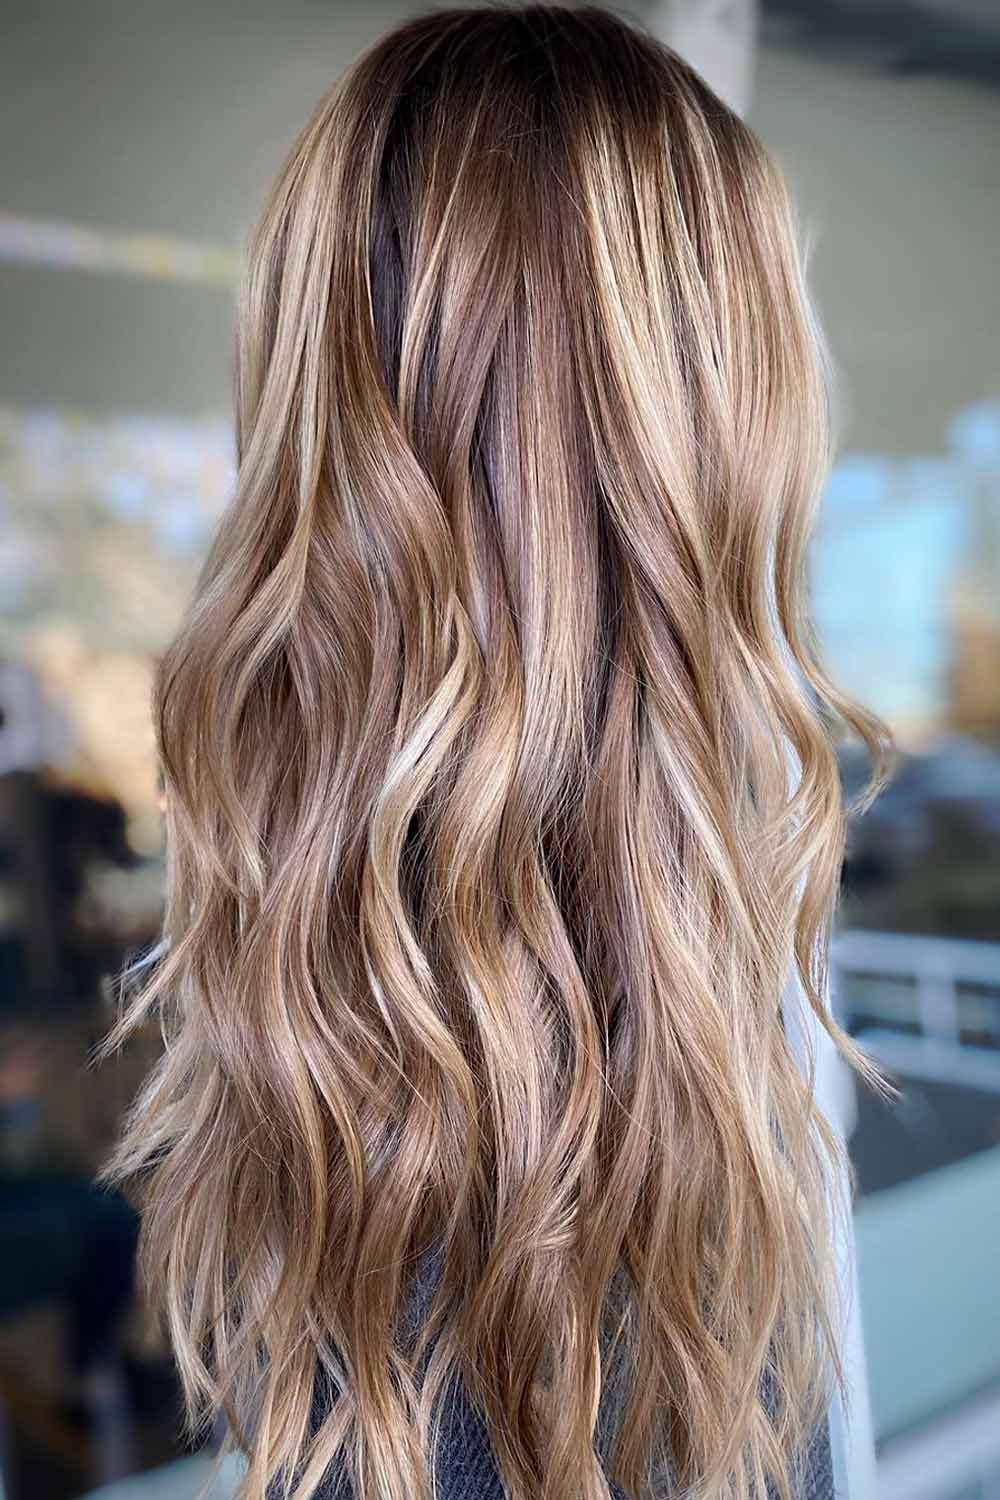 Extra Long Dirty Blonde Hairstyles With Lowlights #dirtyblondehair #dirtyblonde #blondehair #blonde